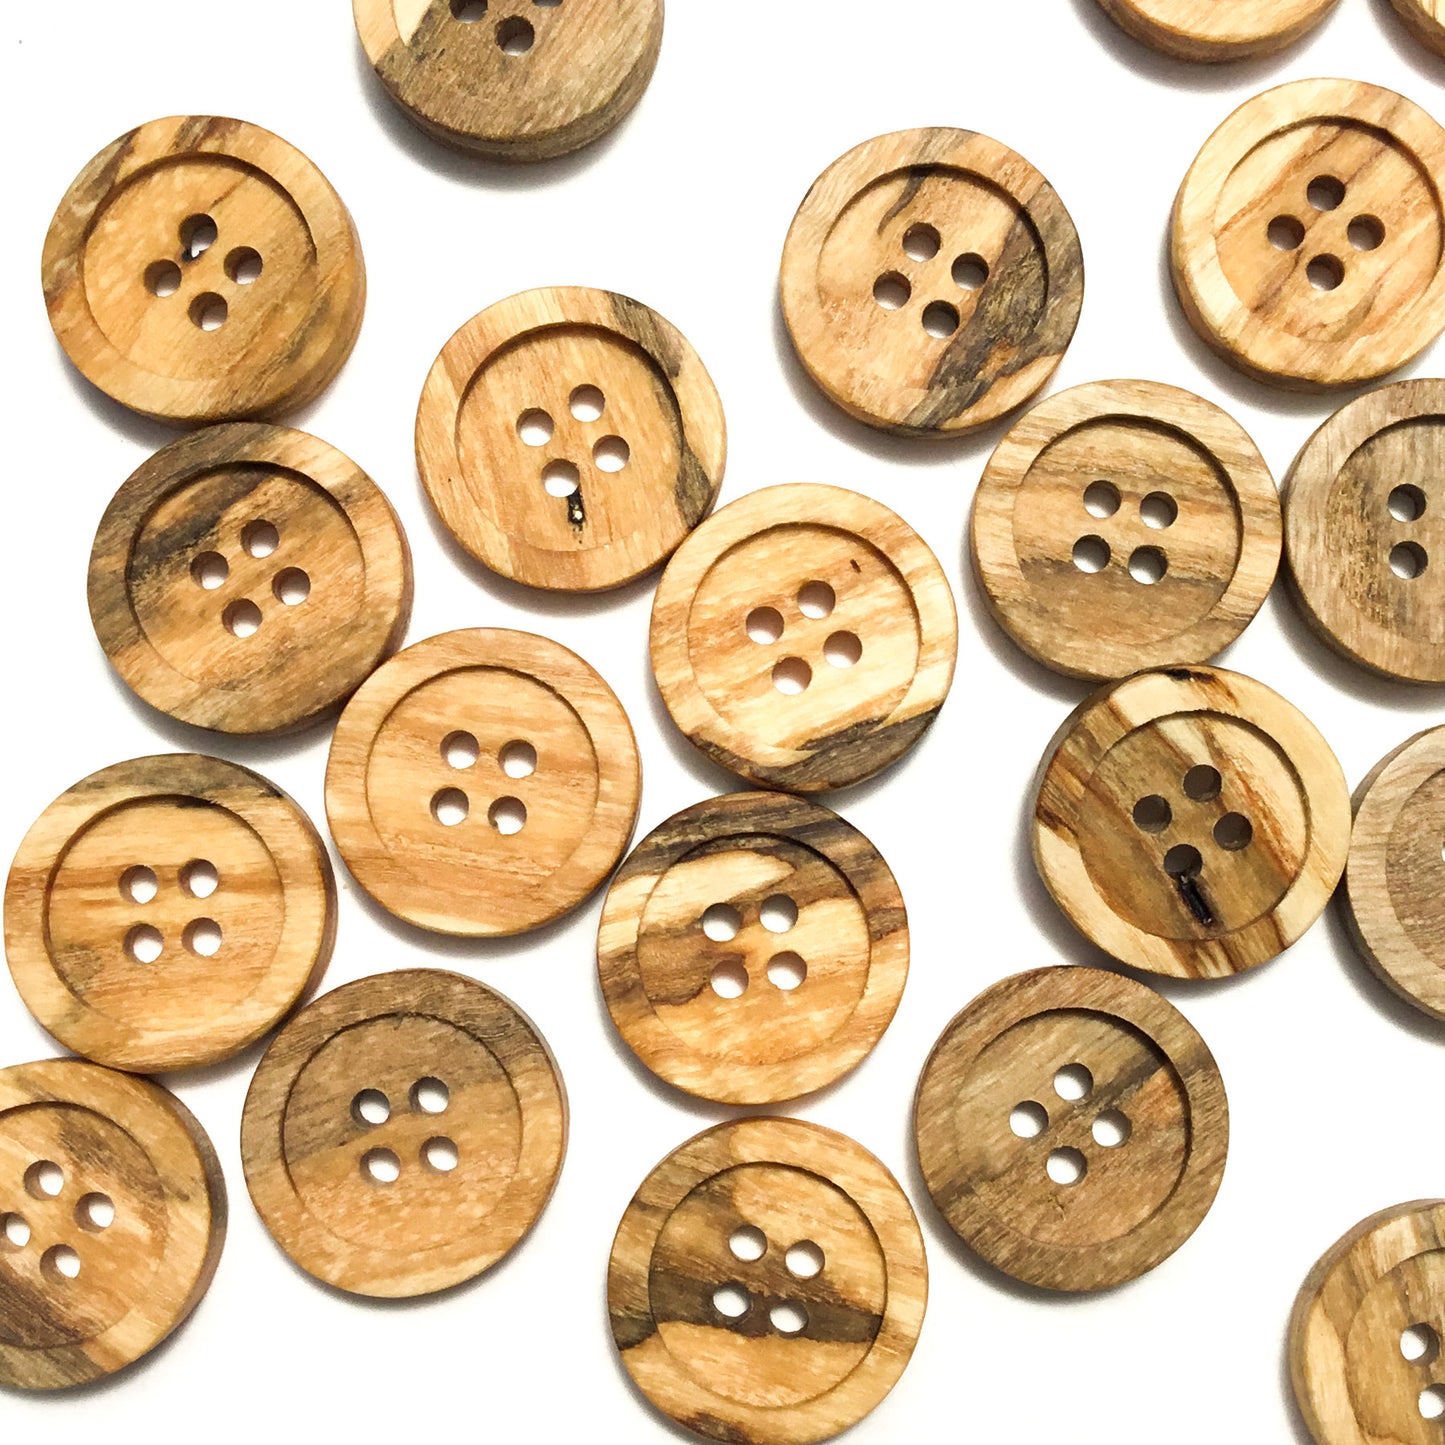 Four Hole Inset Button - Spalted Ash Wood  1"